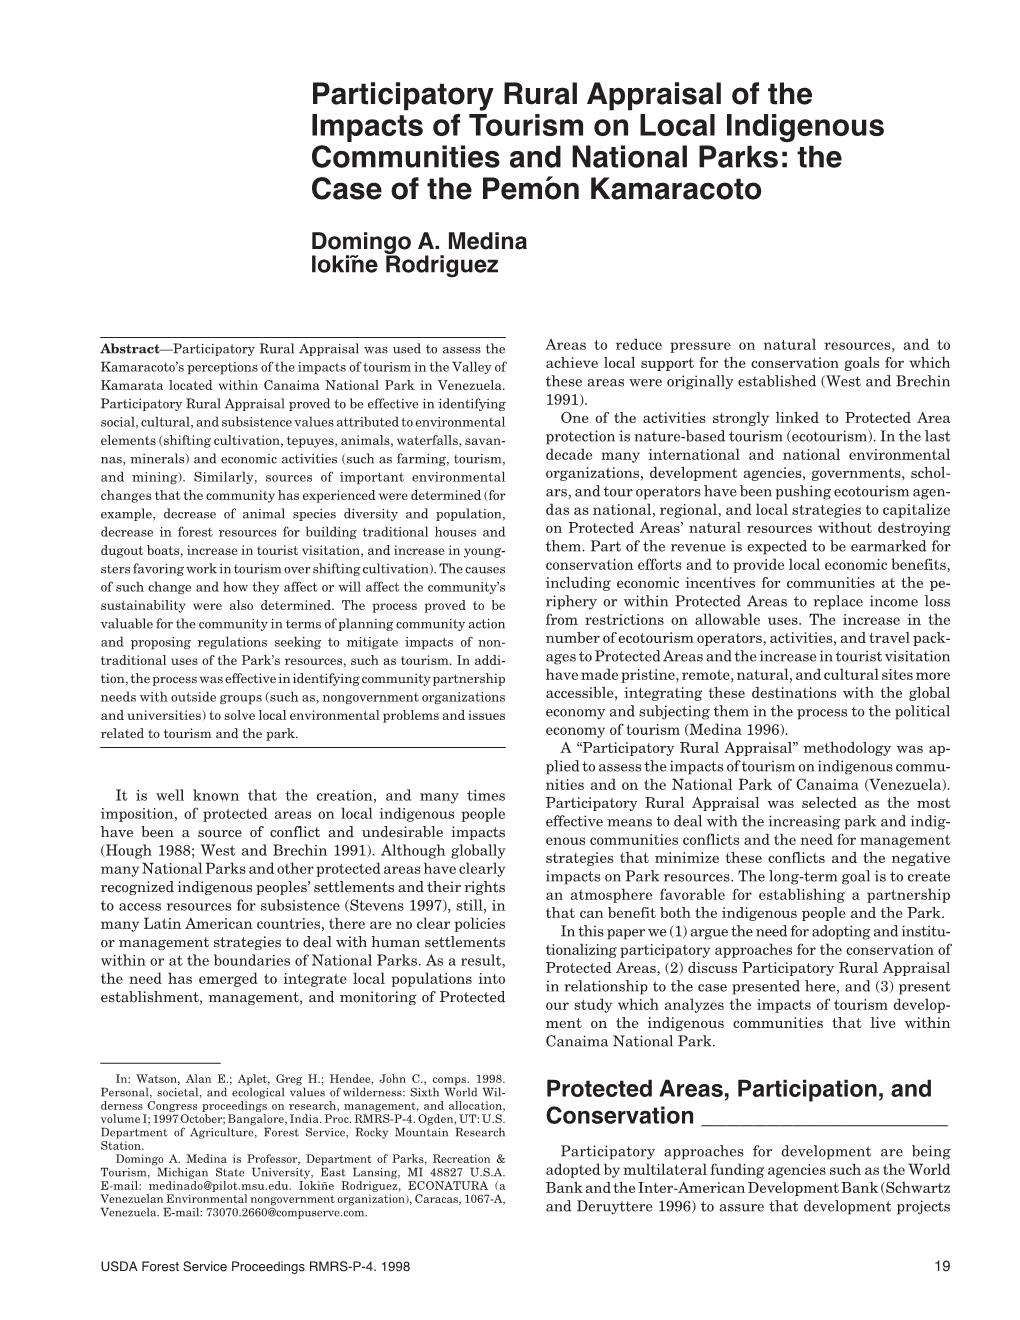 Participatory Rural Appraisal of the Impacts of Tourism on Local Indigenous Communities and National Parks: the Case of the Pemón Kamaracoto